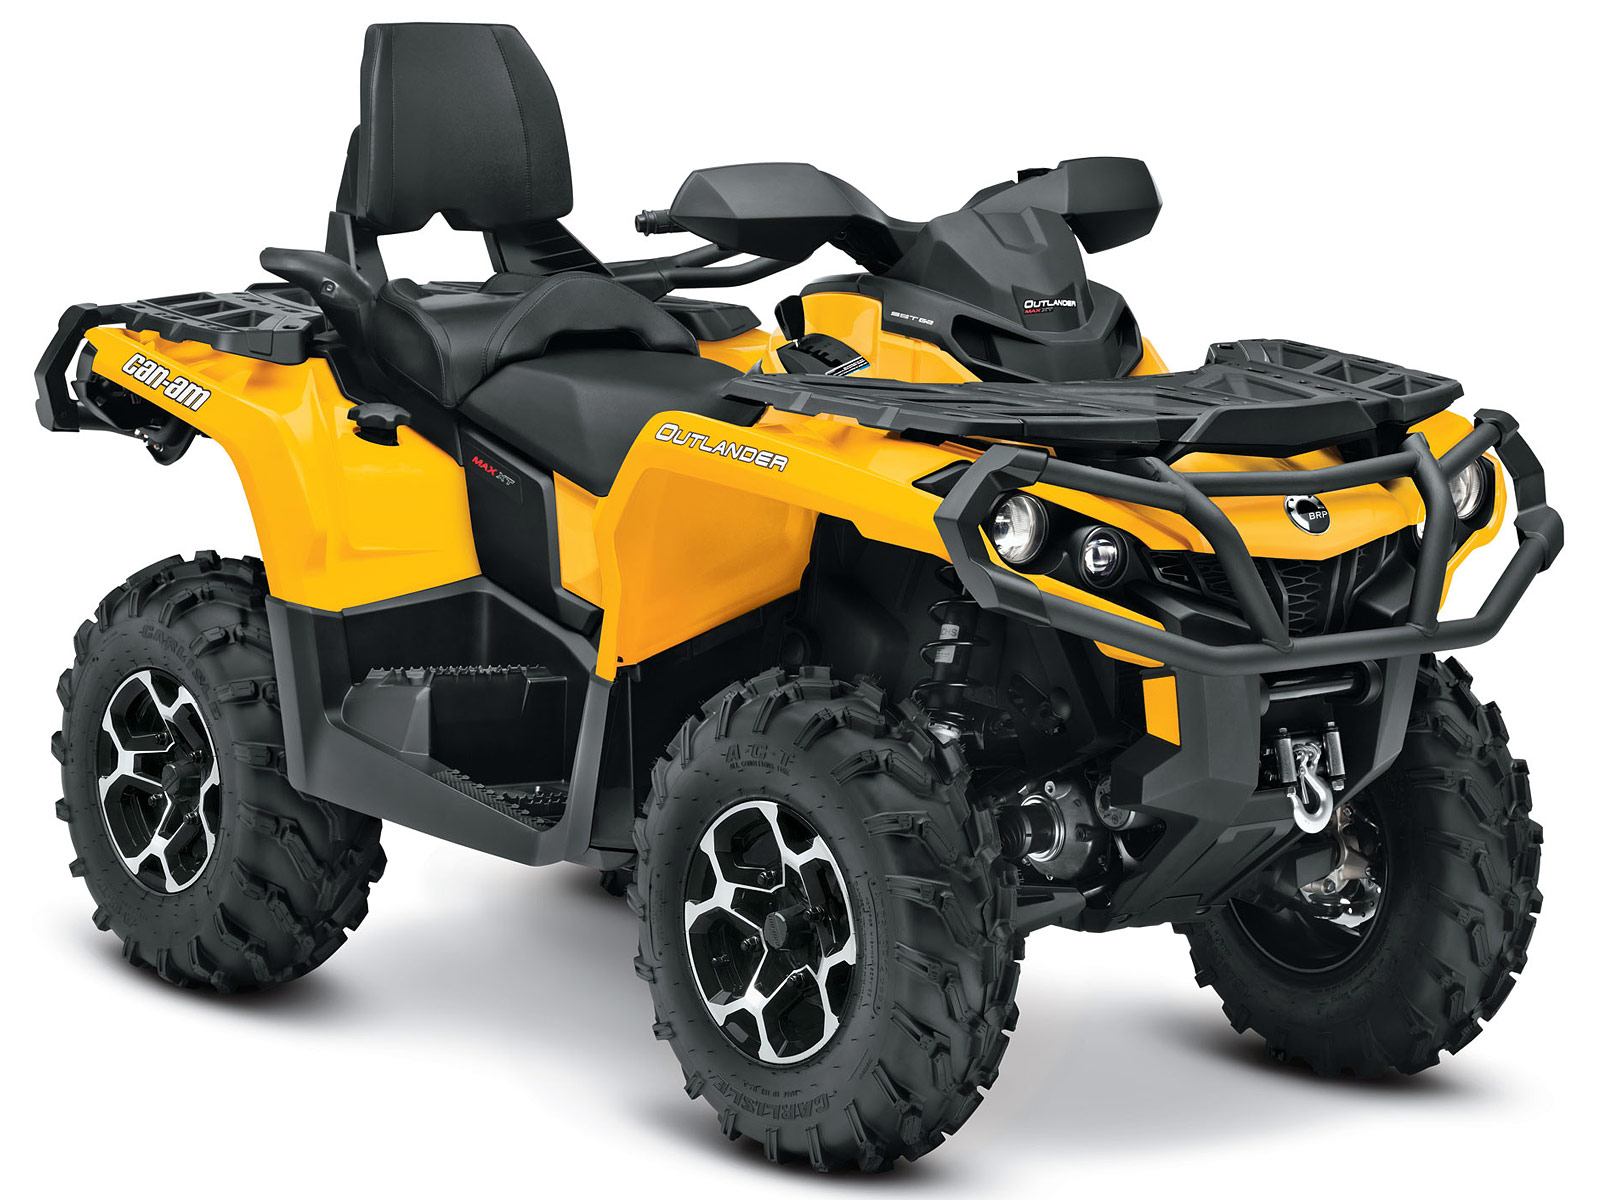 2013-insurance-information-can-am-outlander-max-xt-800r-atv-pictures